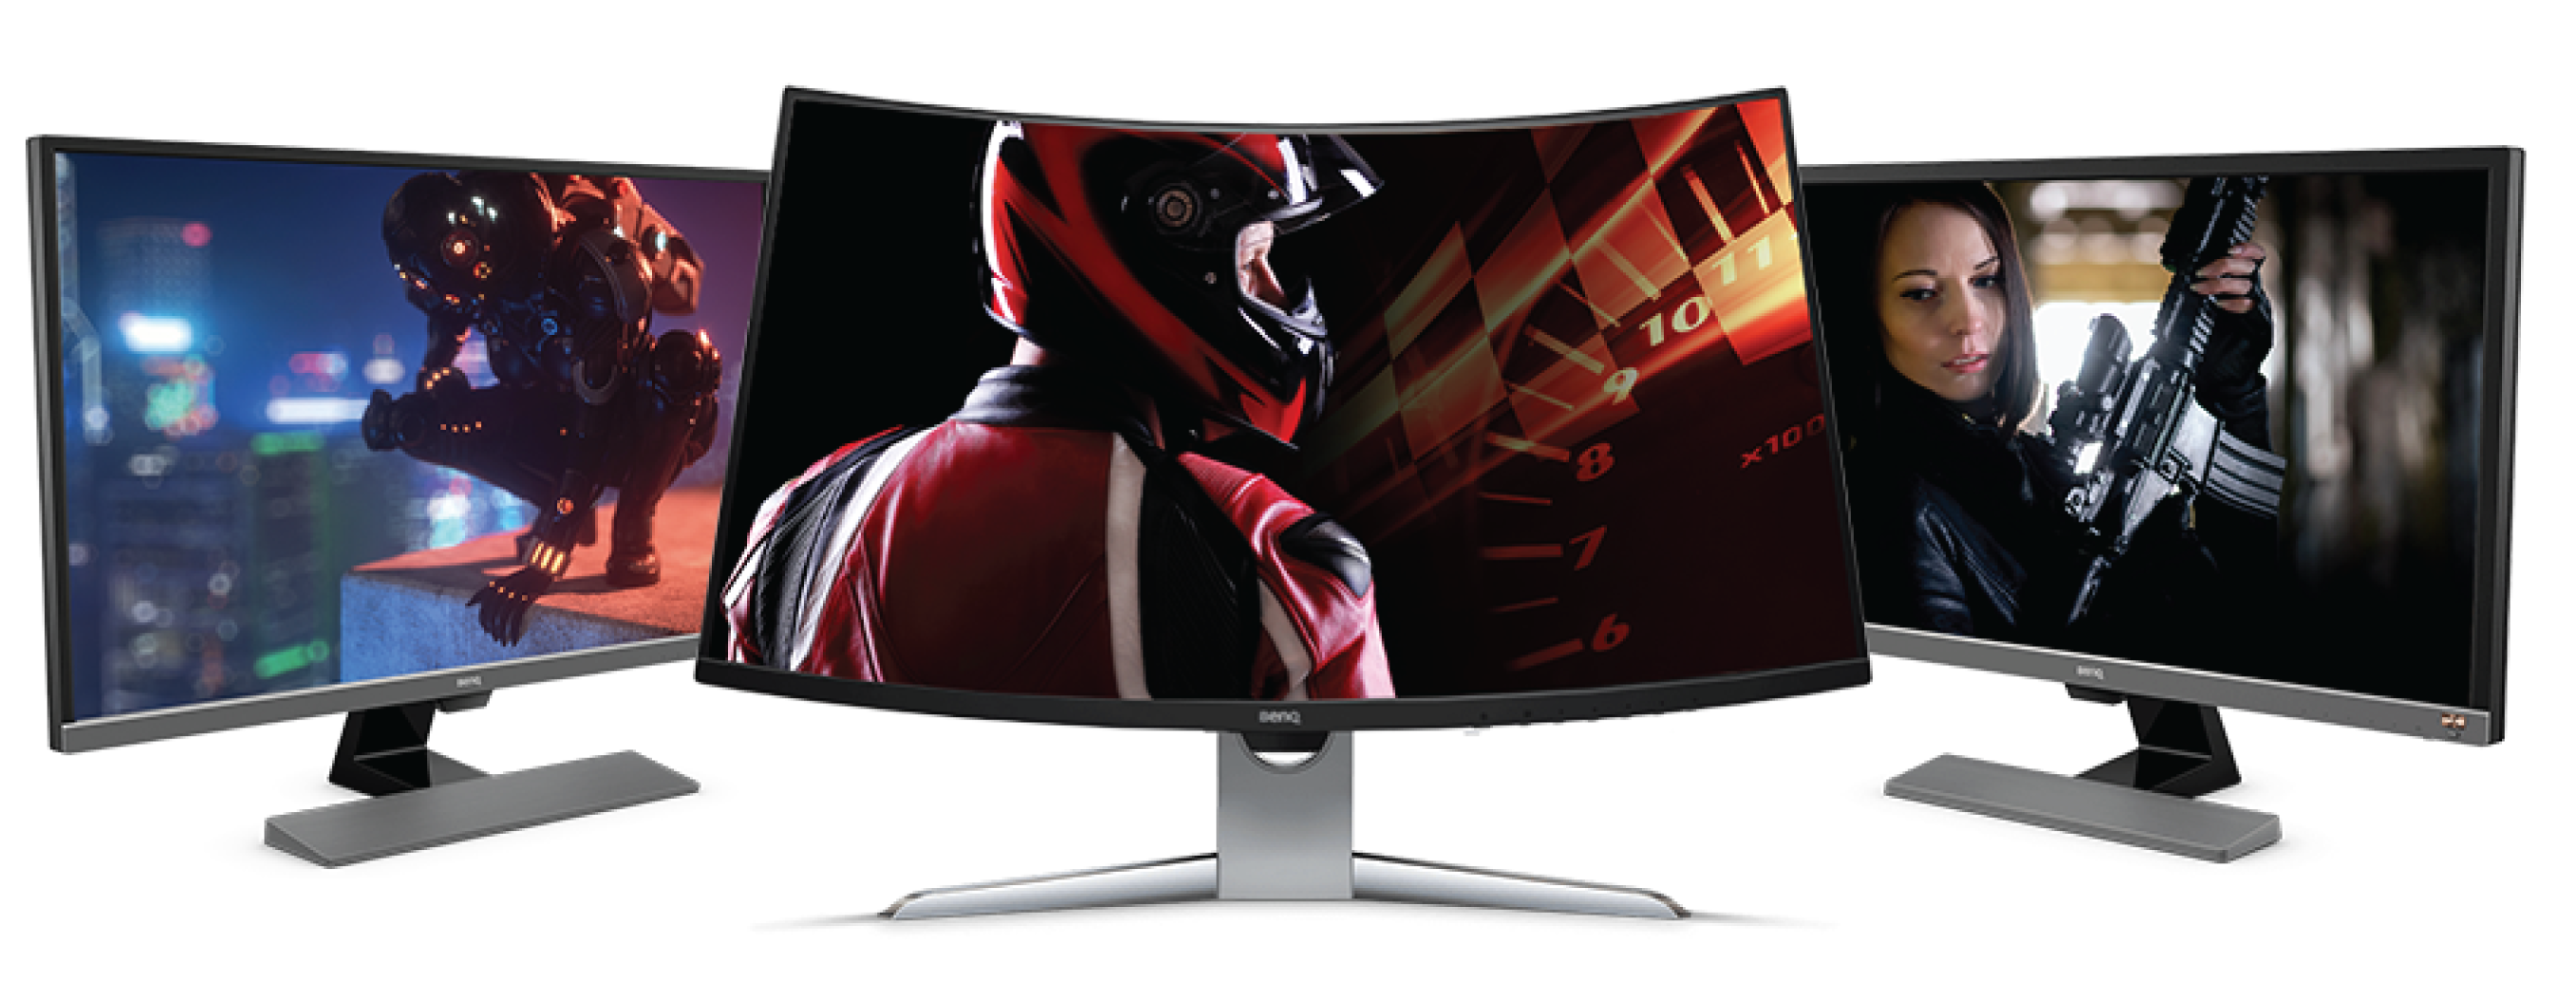 Console Gaming Monitor Benq Finland